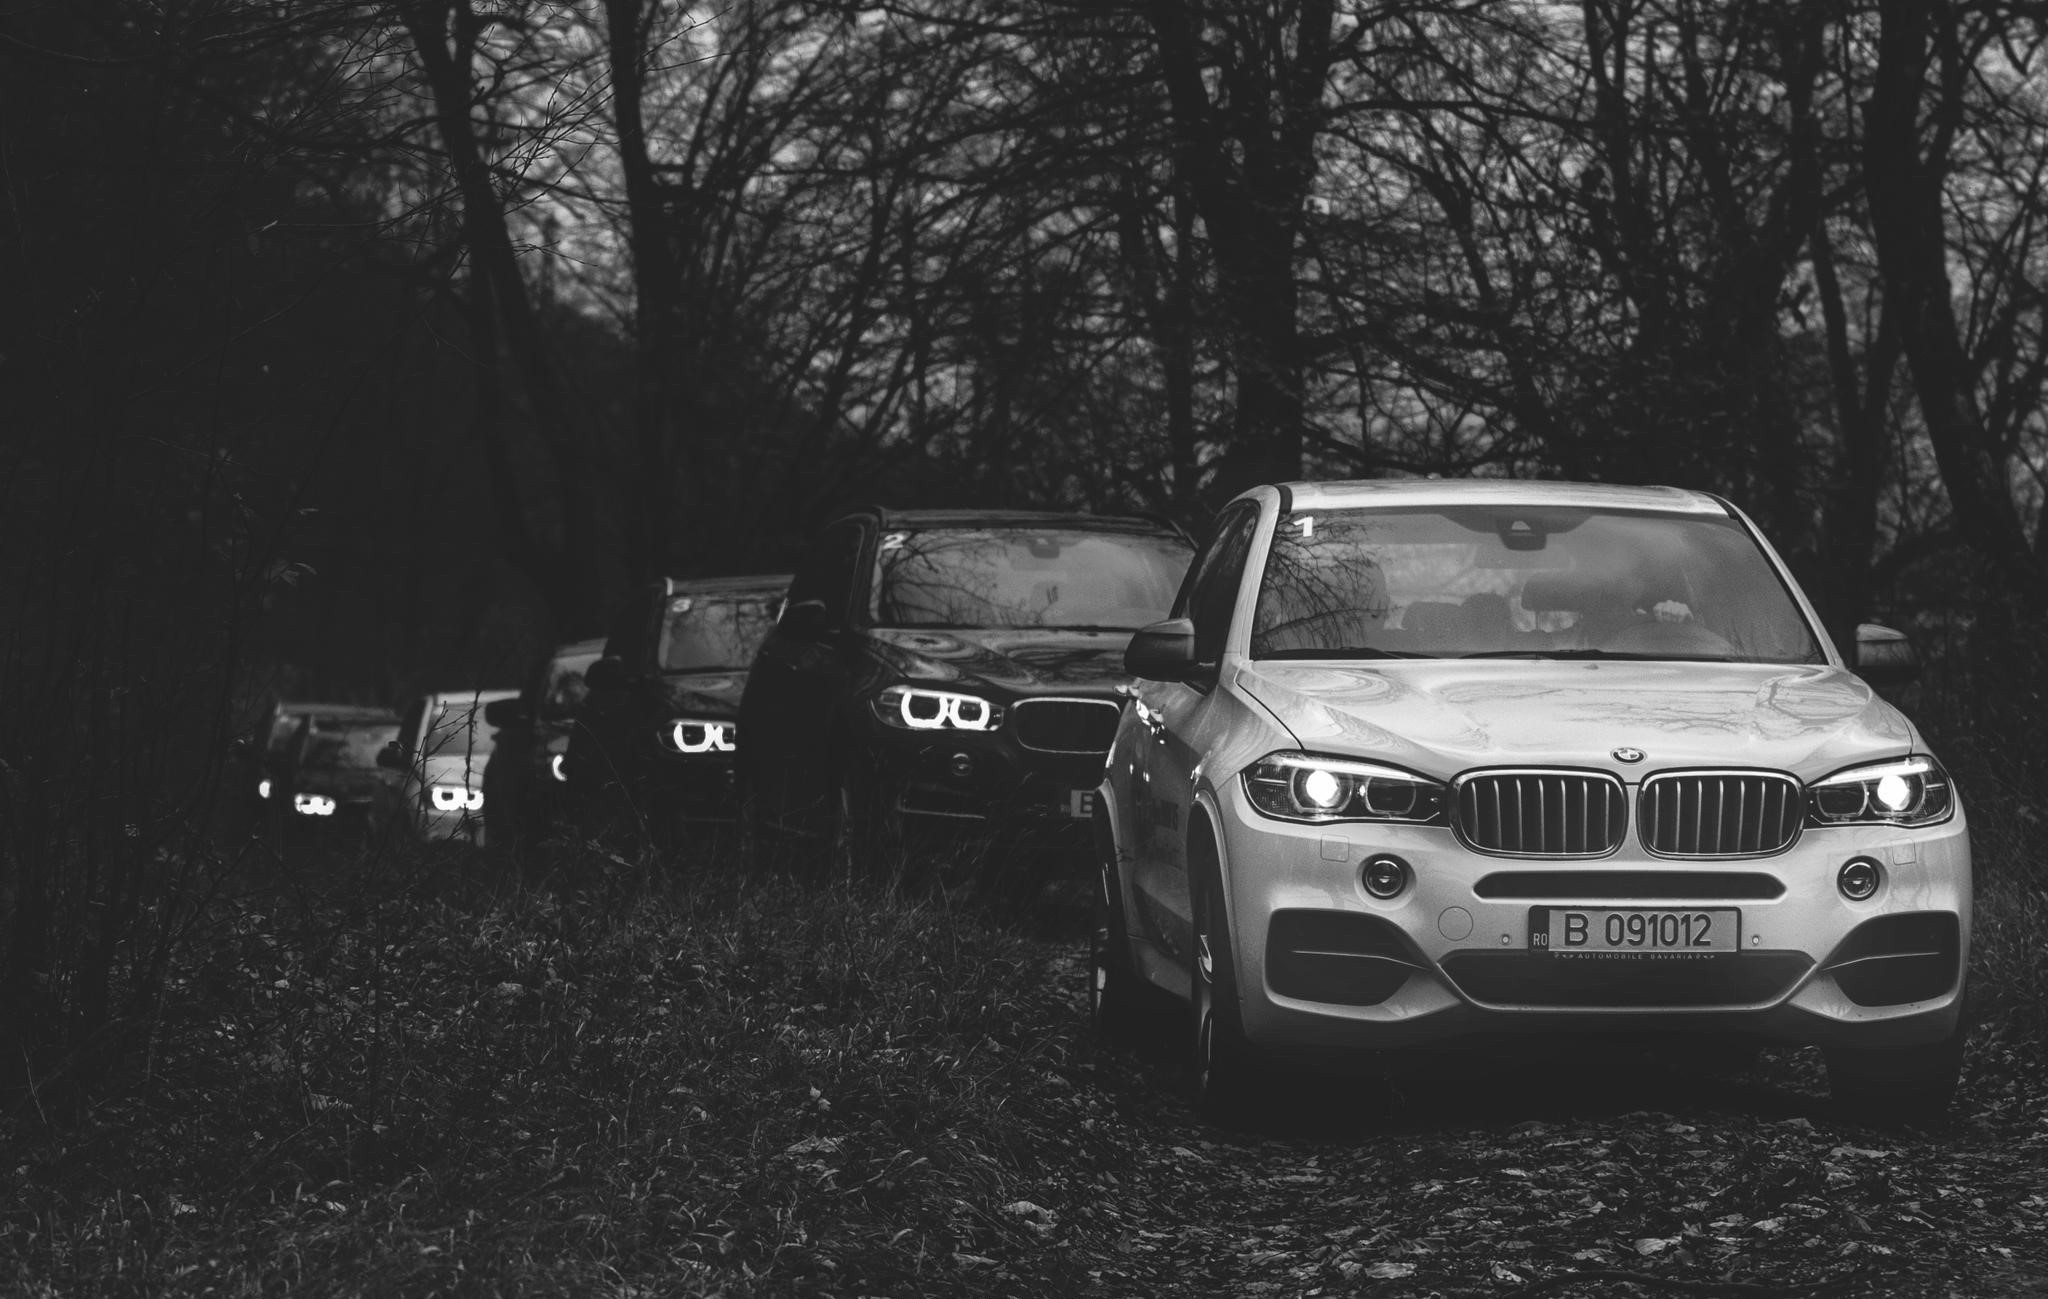 General 2048x1299 BMW car vehicle monochrome numbers BMW X5 outdoors